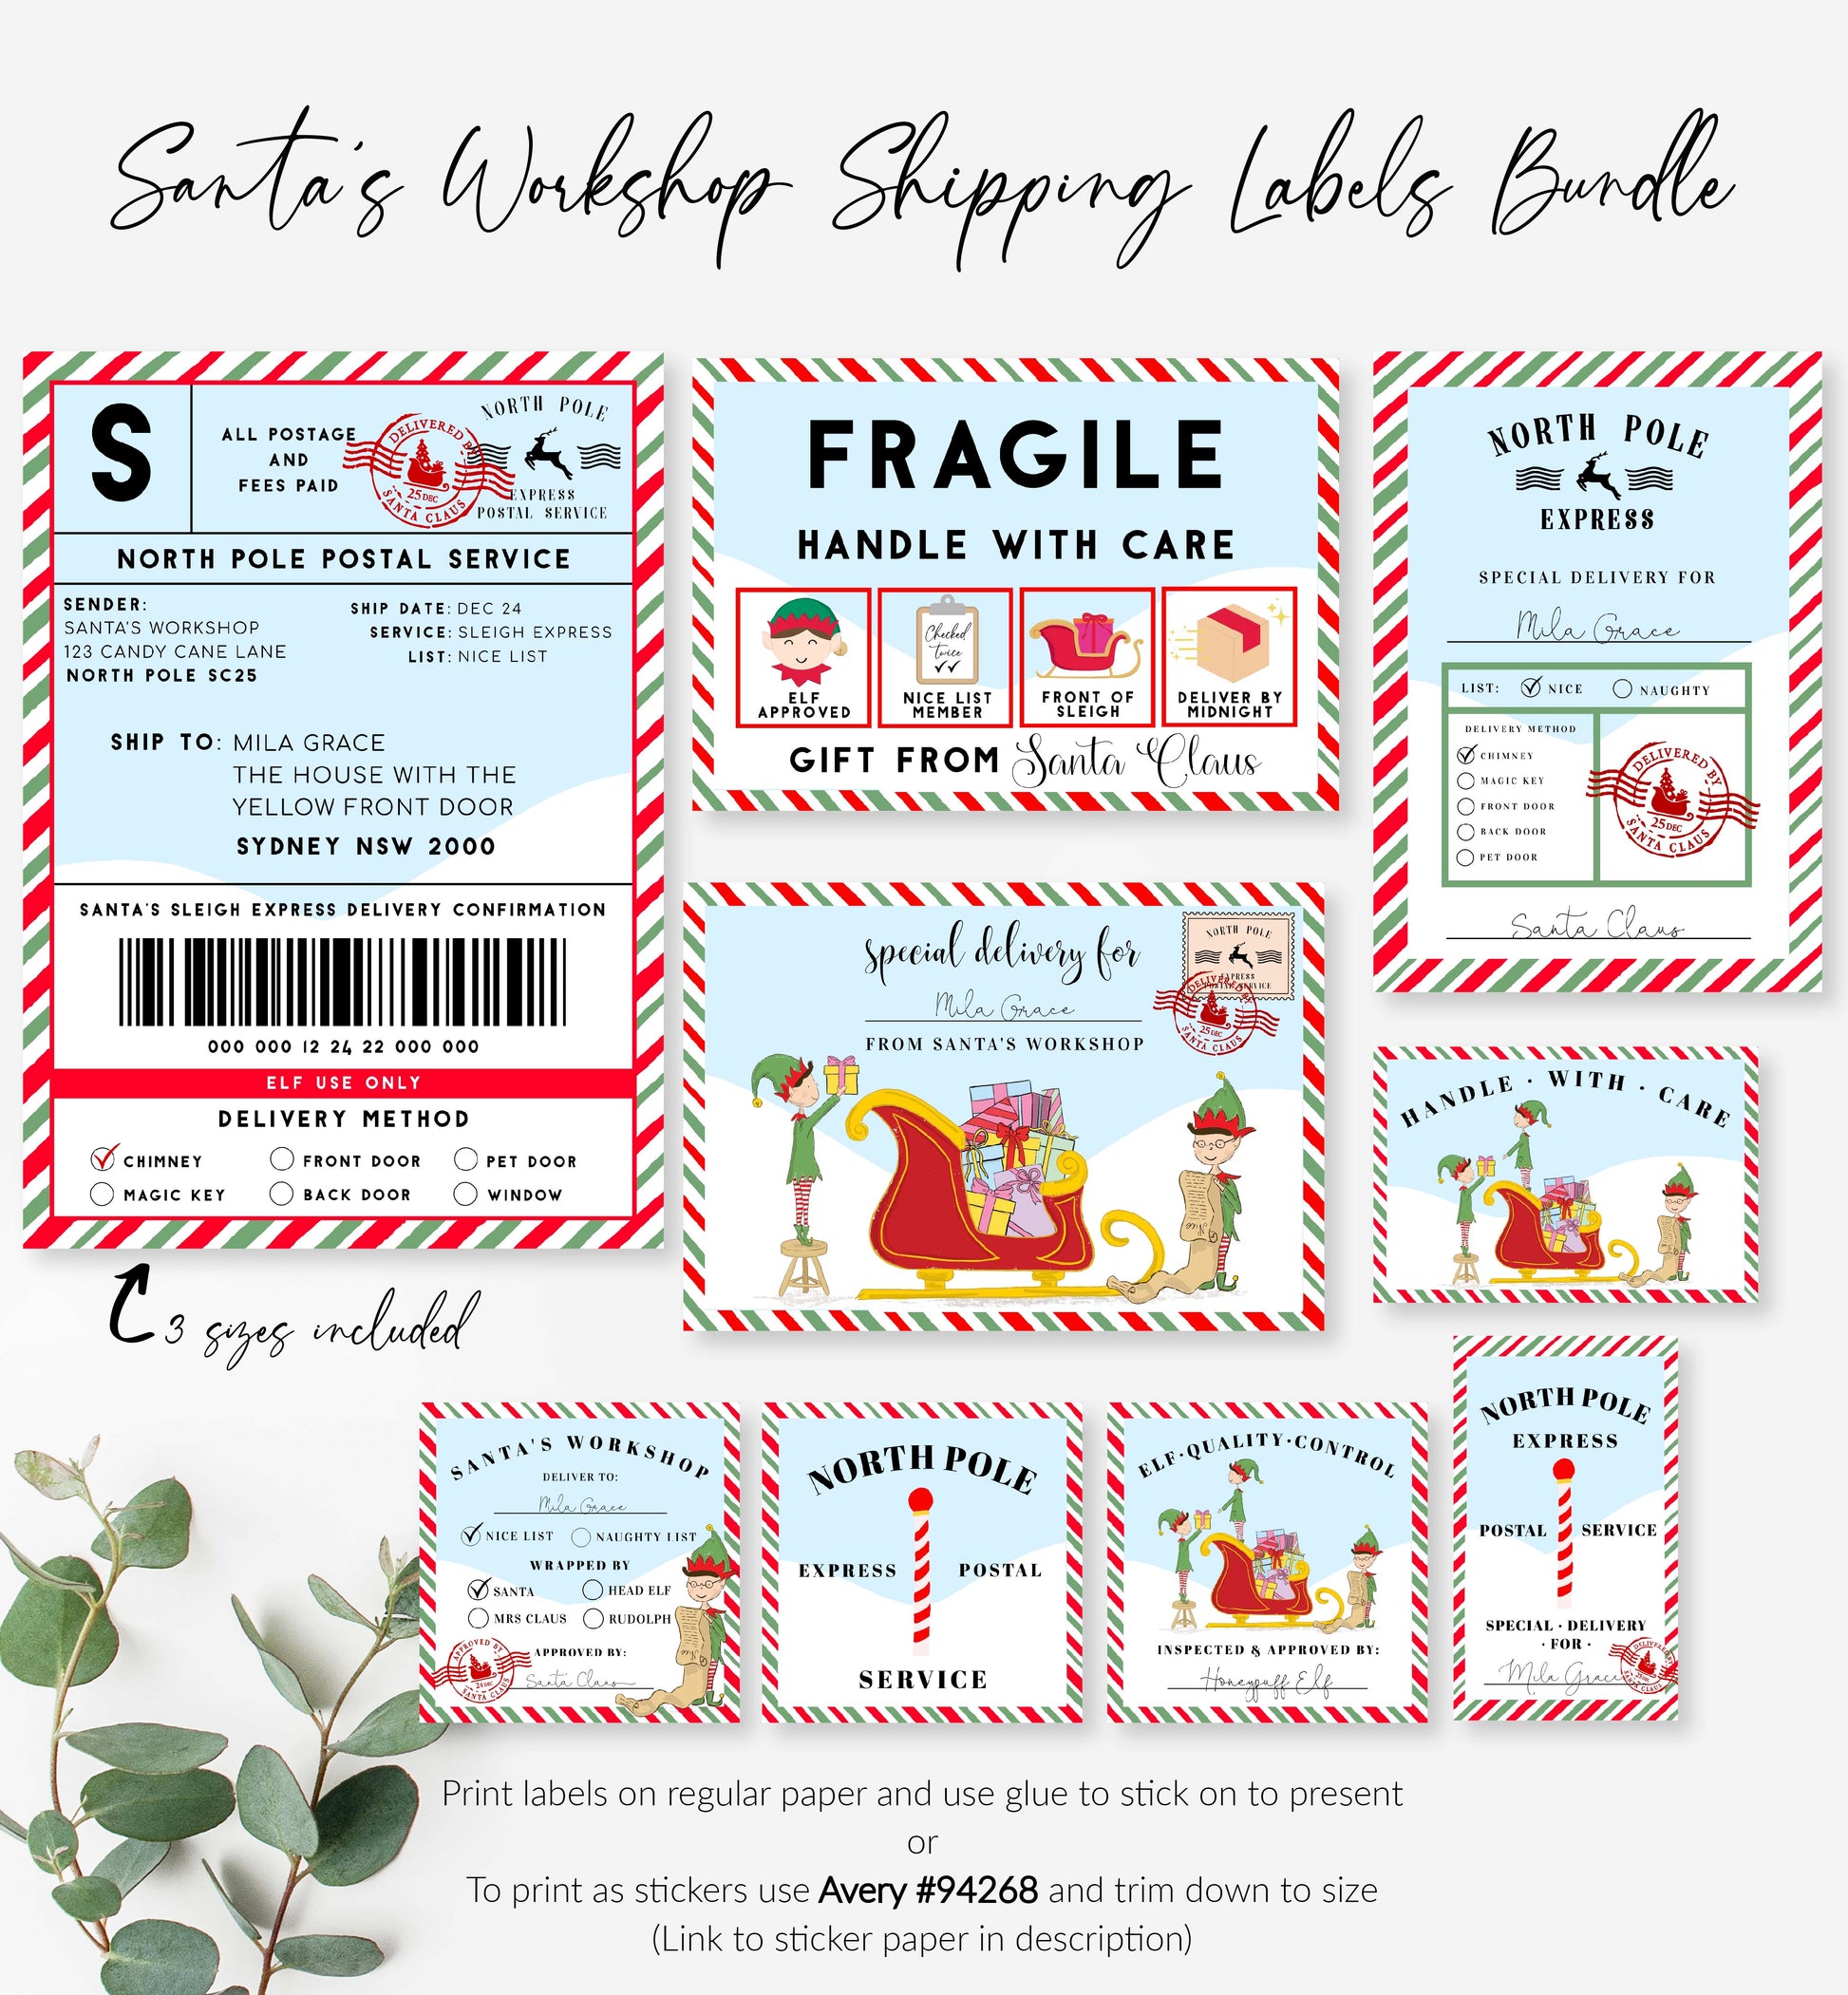 Christmas shipping label, Special overnight delivery for, custom